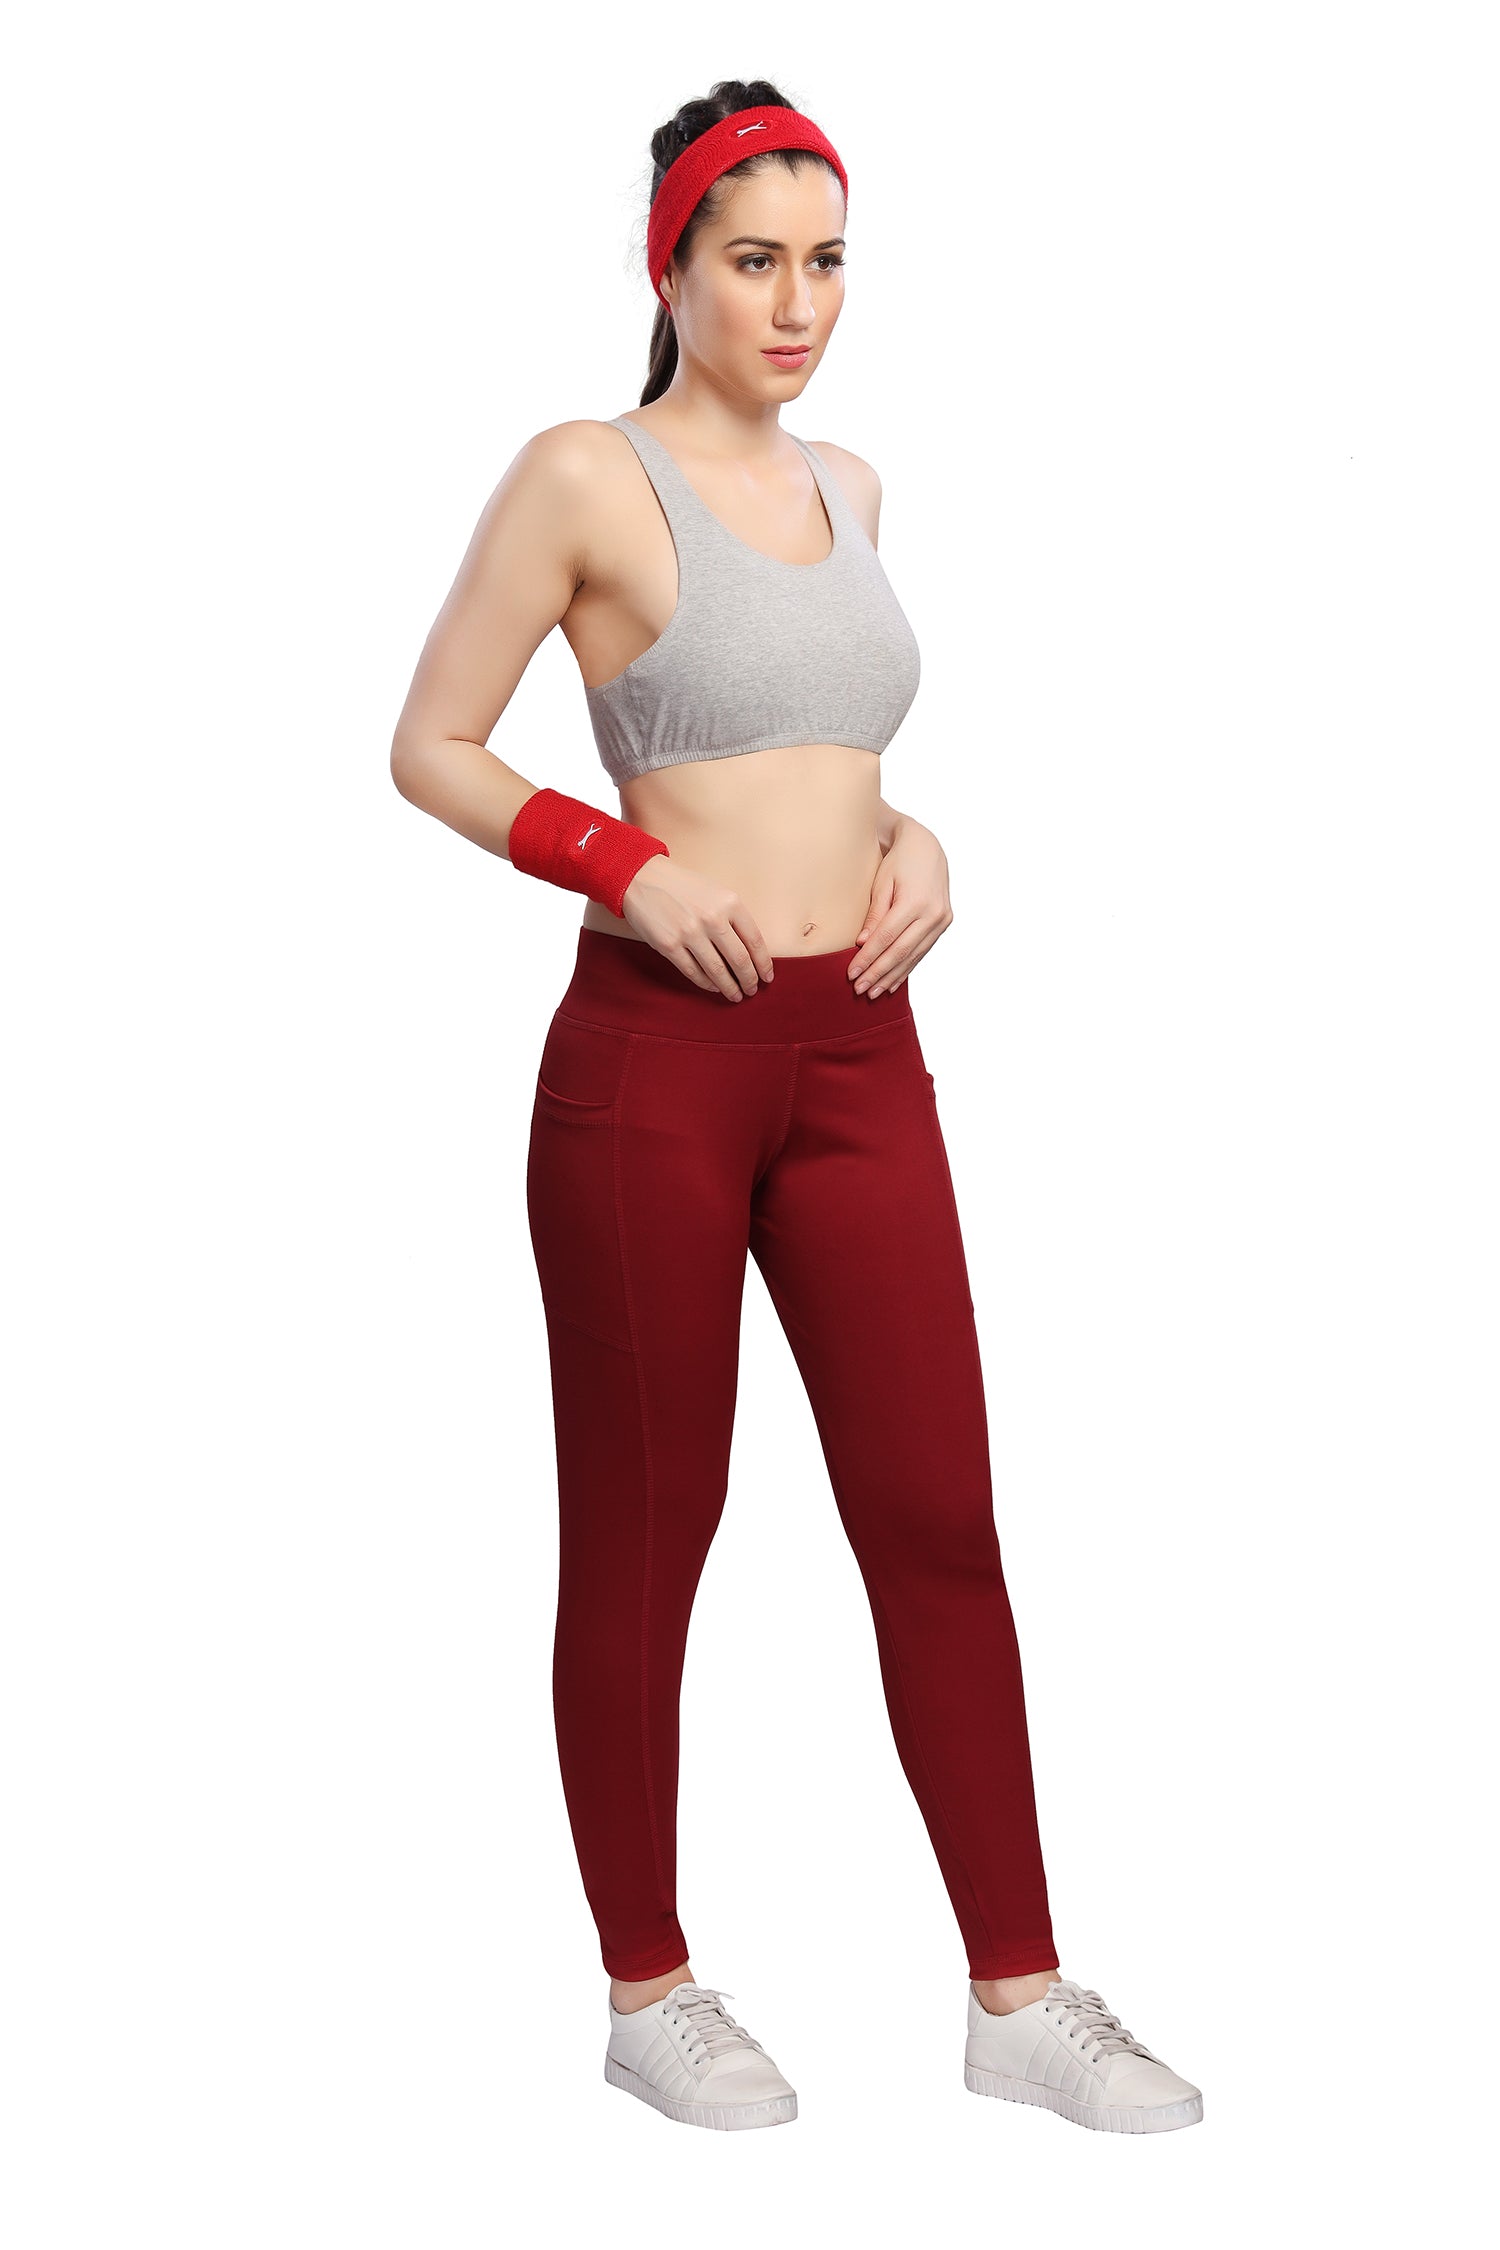 Women's High Waisted Yoga Capris with Pockets,Tummy Control Workout Sports Running  Capri Leggings - Red 